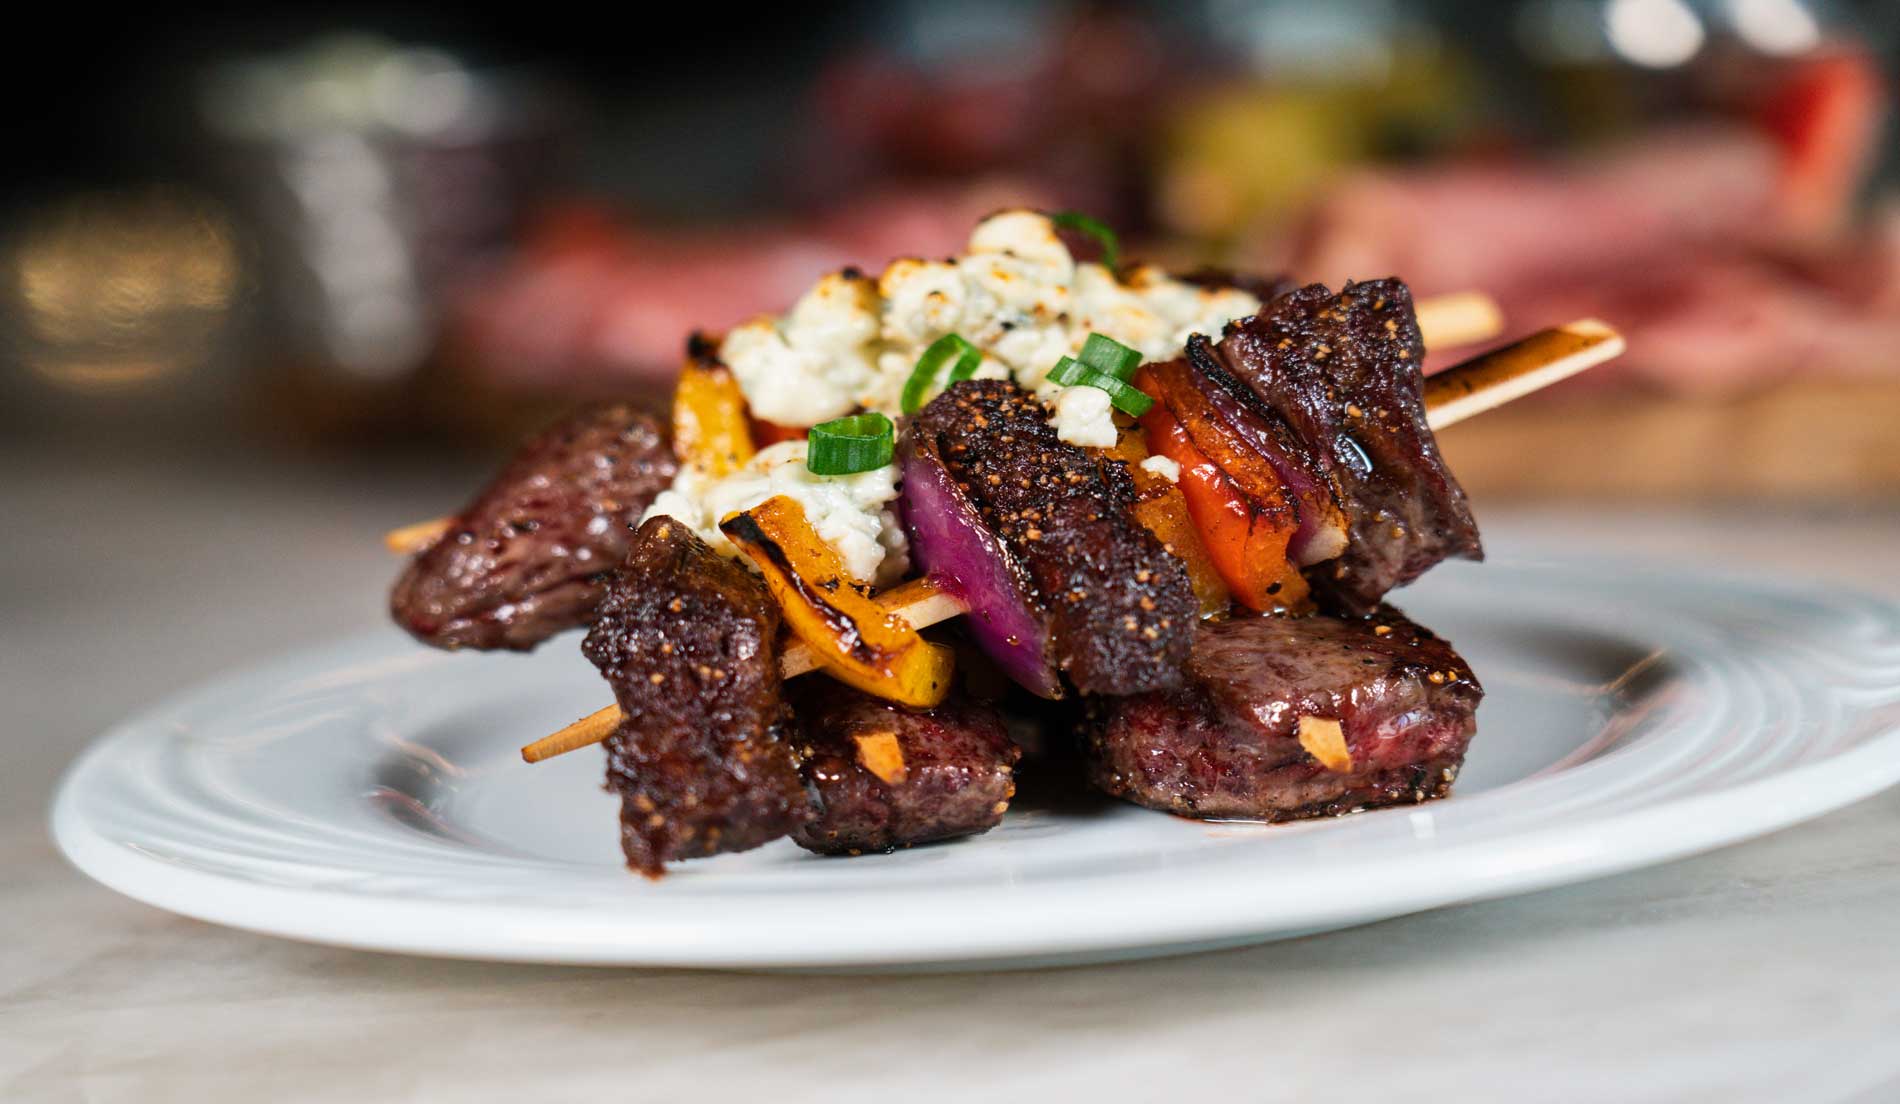 Dine on USDA Prime Aged Beef Kabobs at our Bar Tasting Event in College Station TX